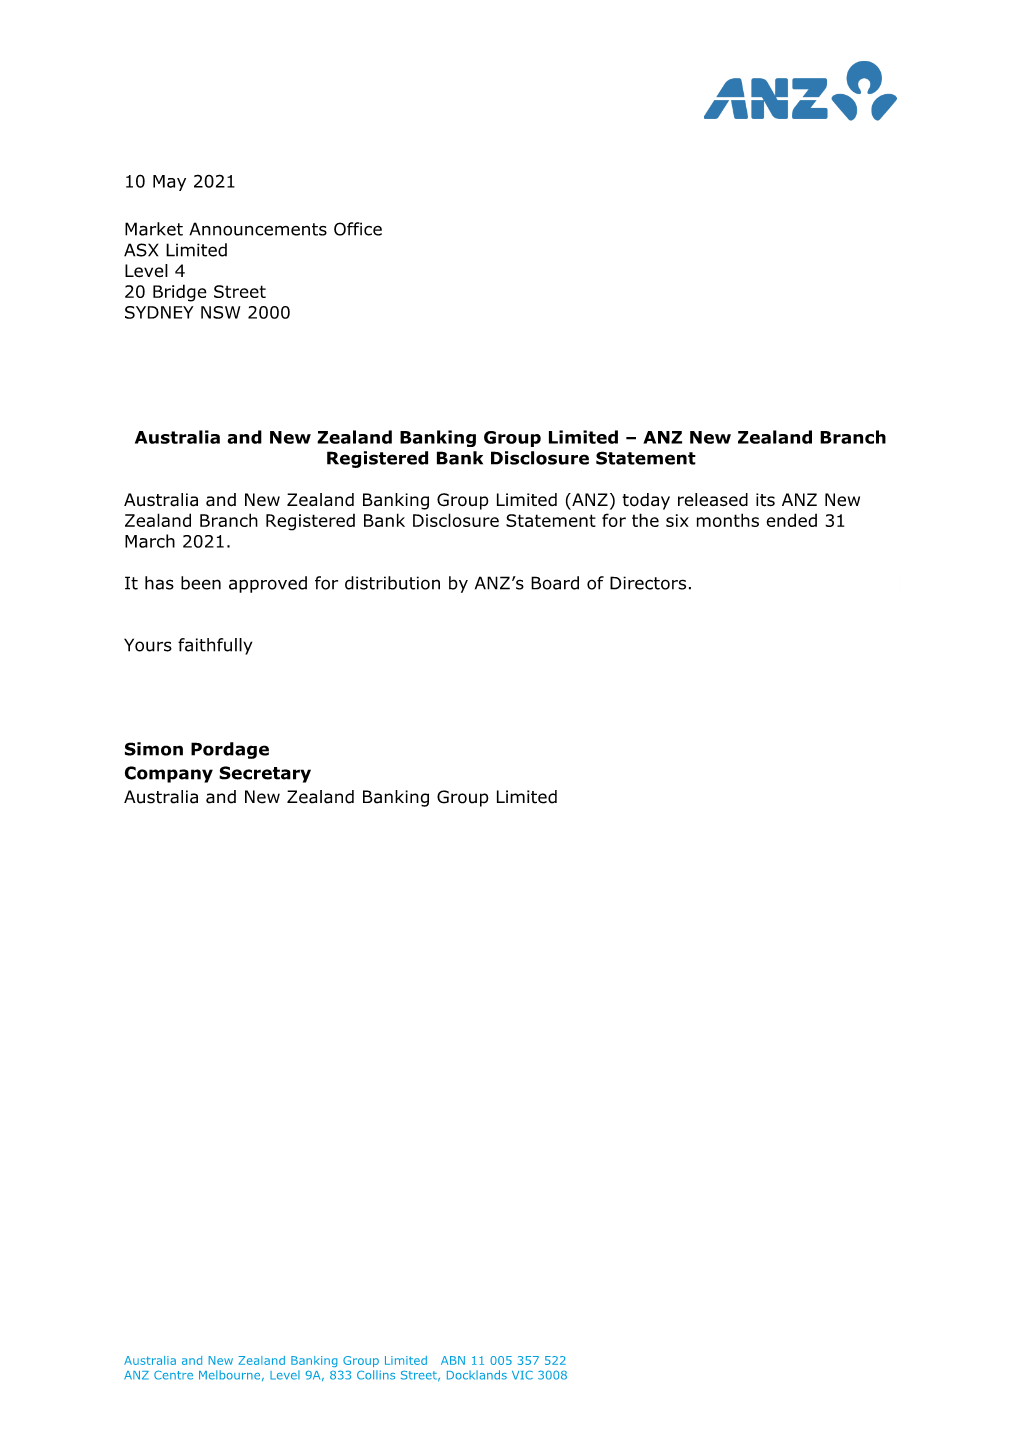 10 May 2021 Market Announcements Office ASX Limited Level 4 20